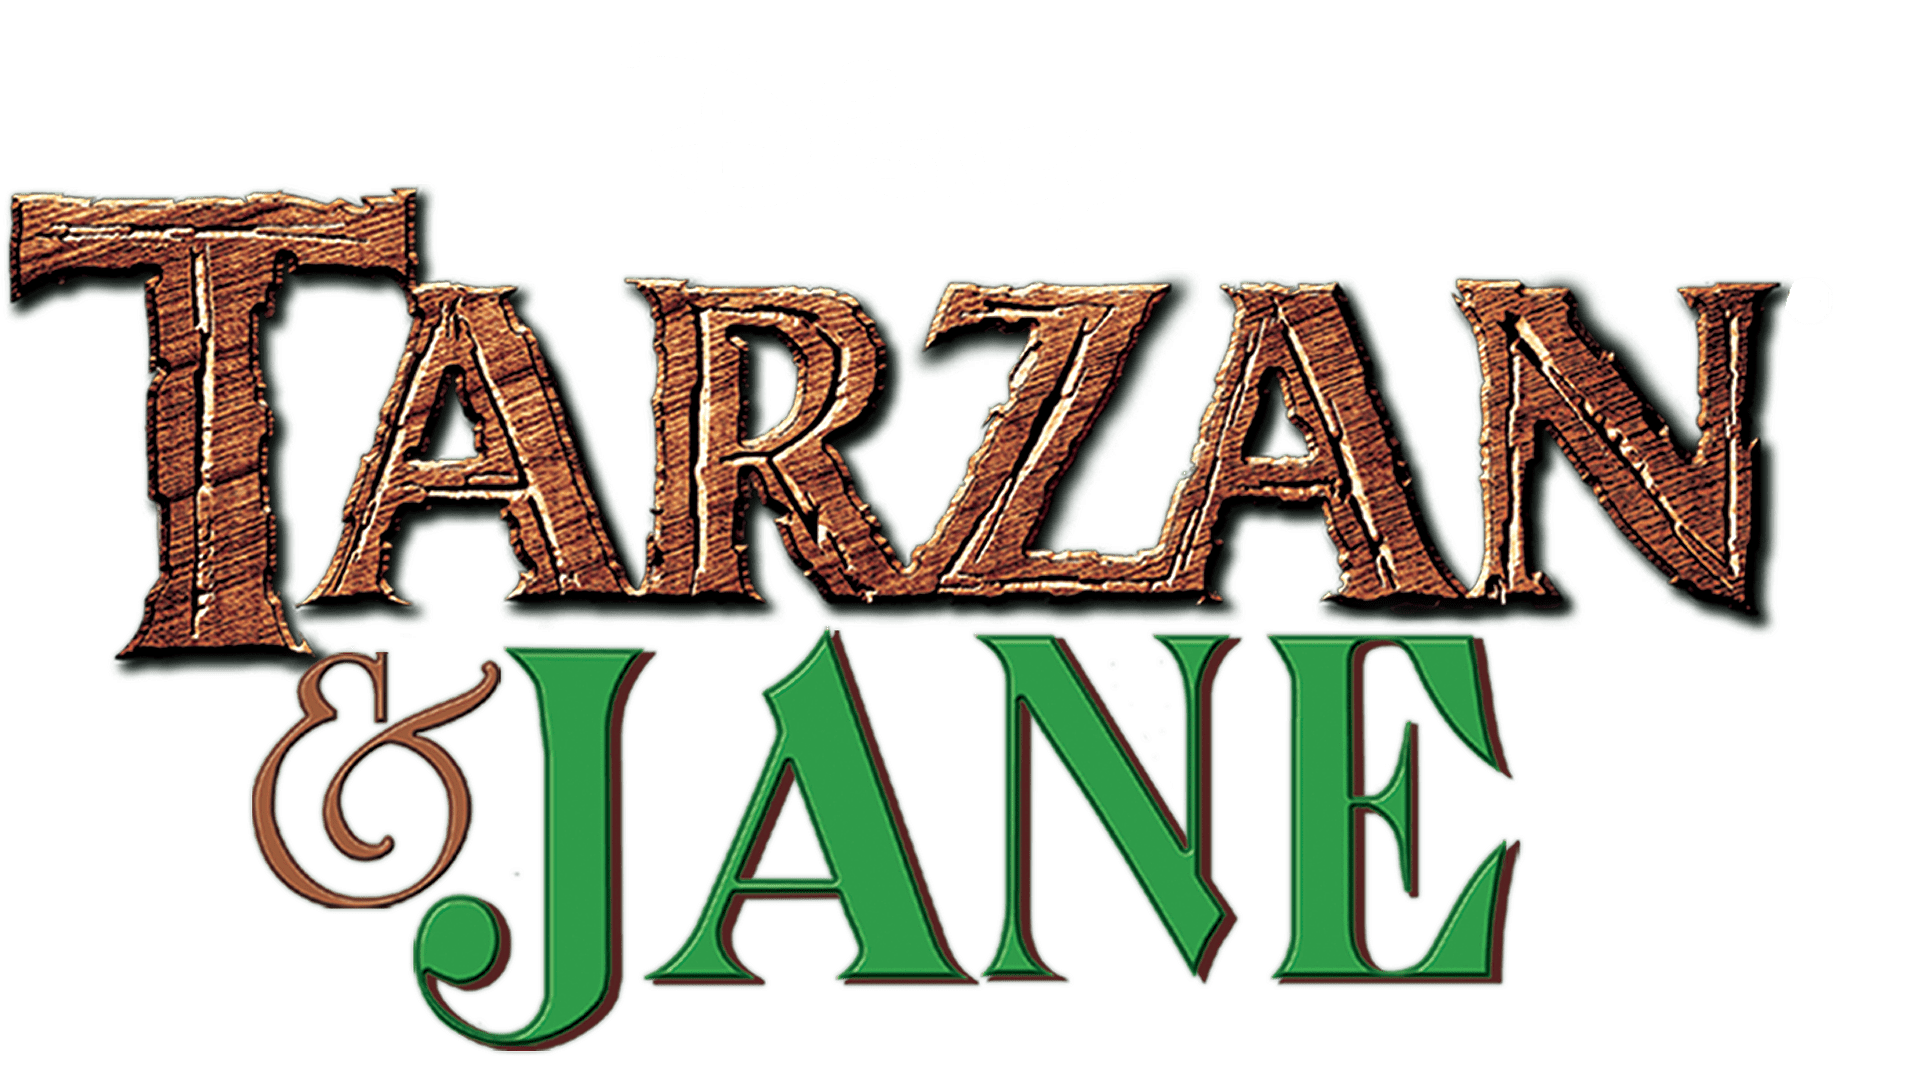 chris melville recommends tarzan and jane online pic